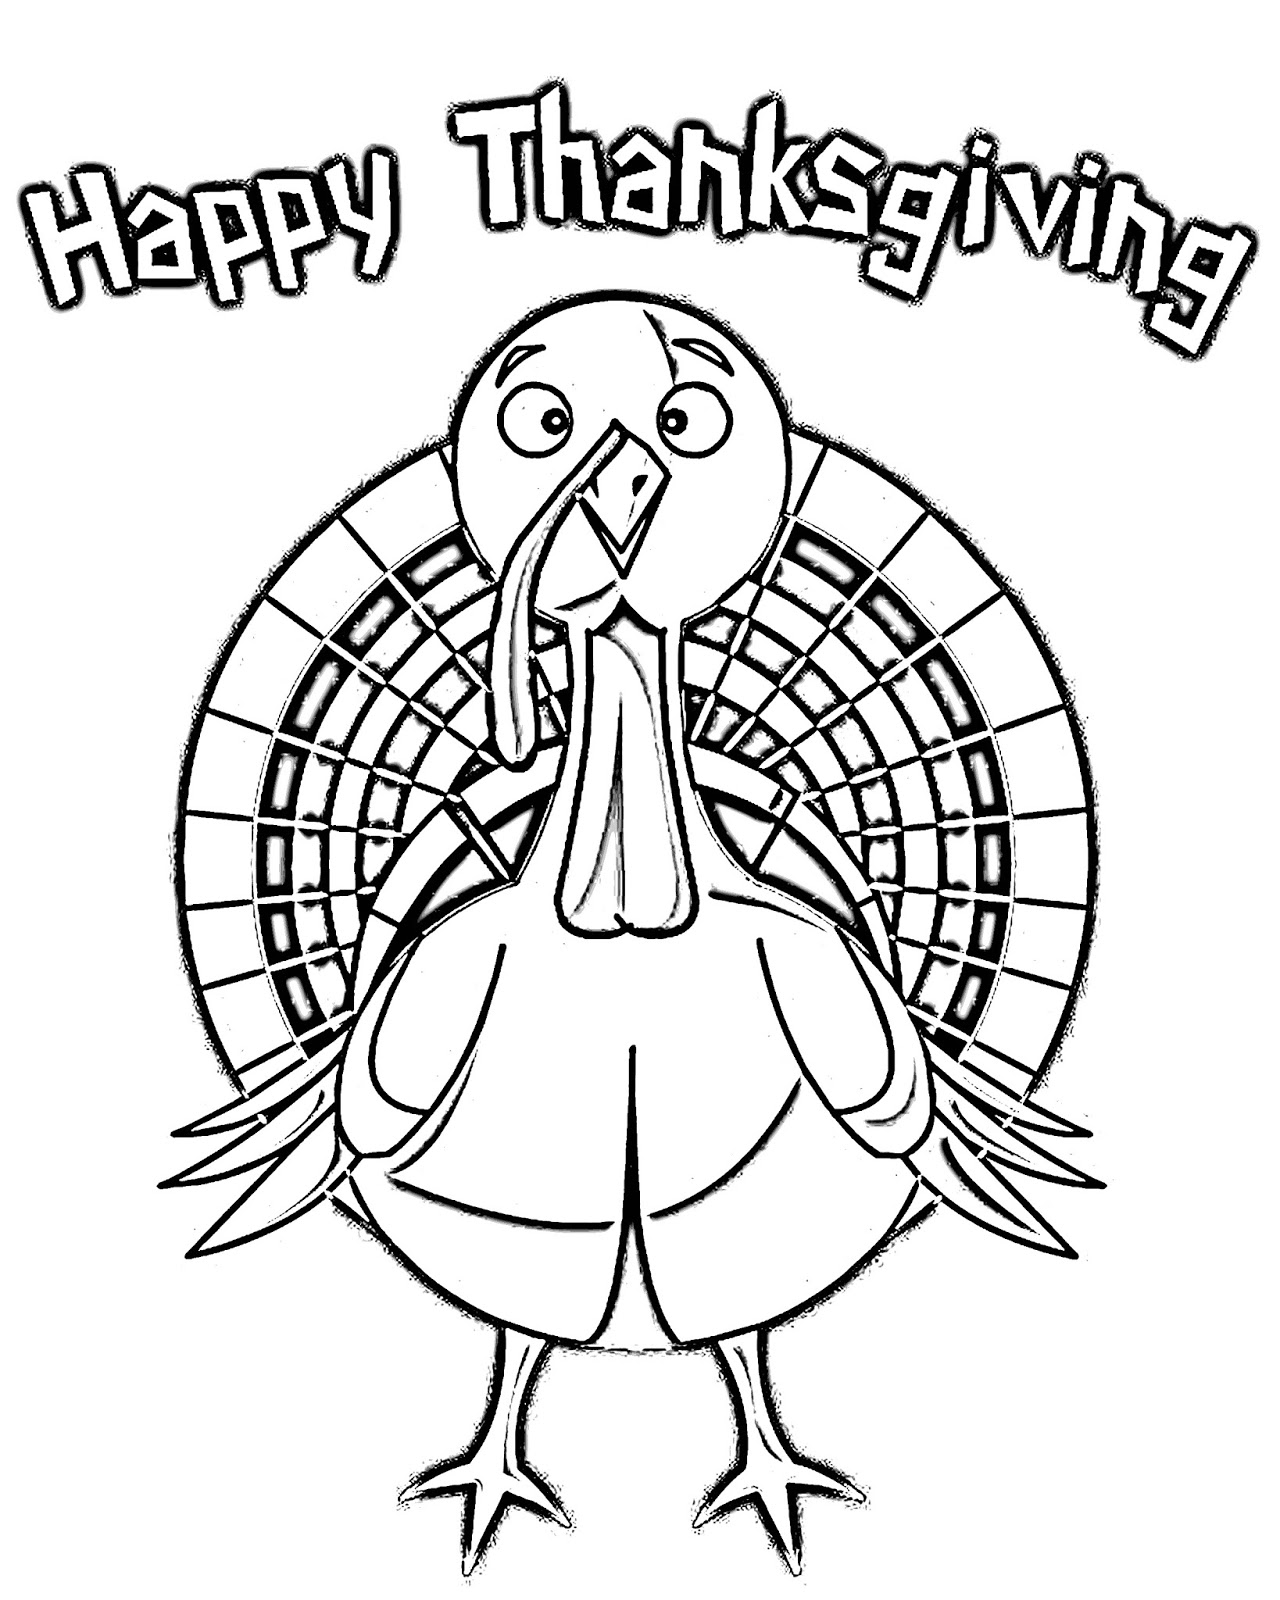 36+ Thanksgiving Turkey Coloring Page Background